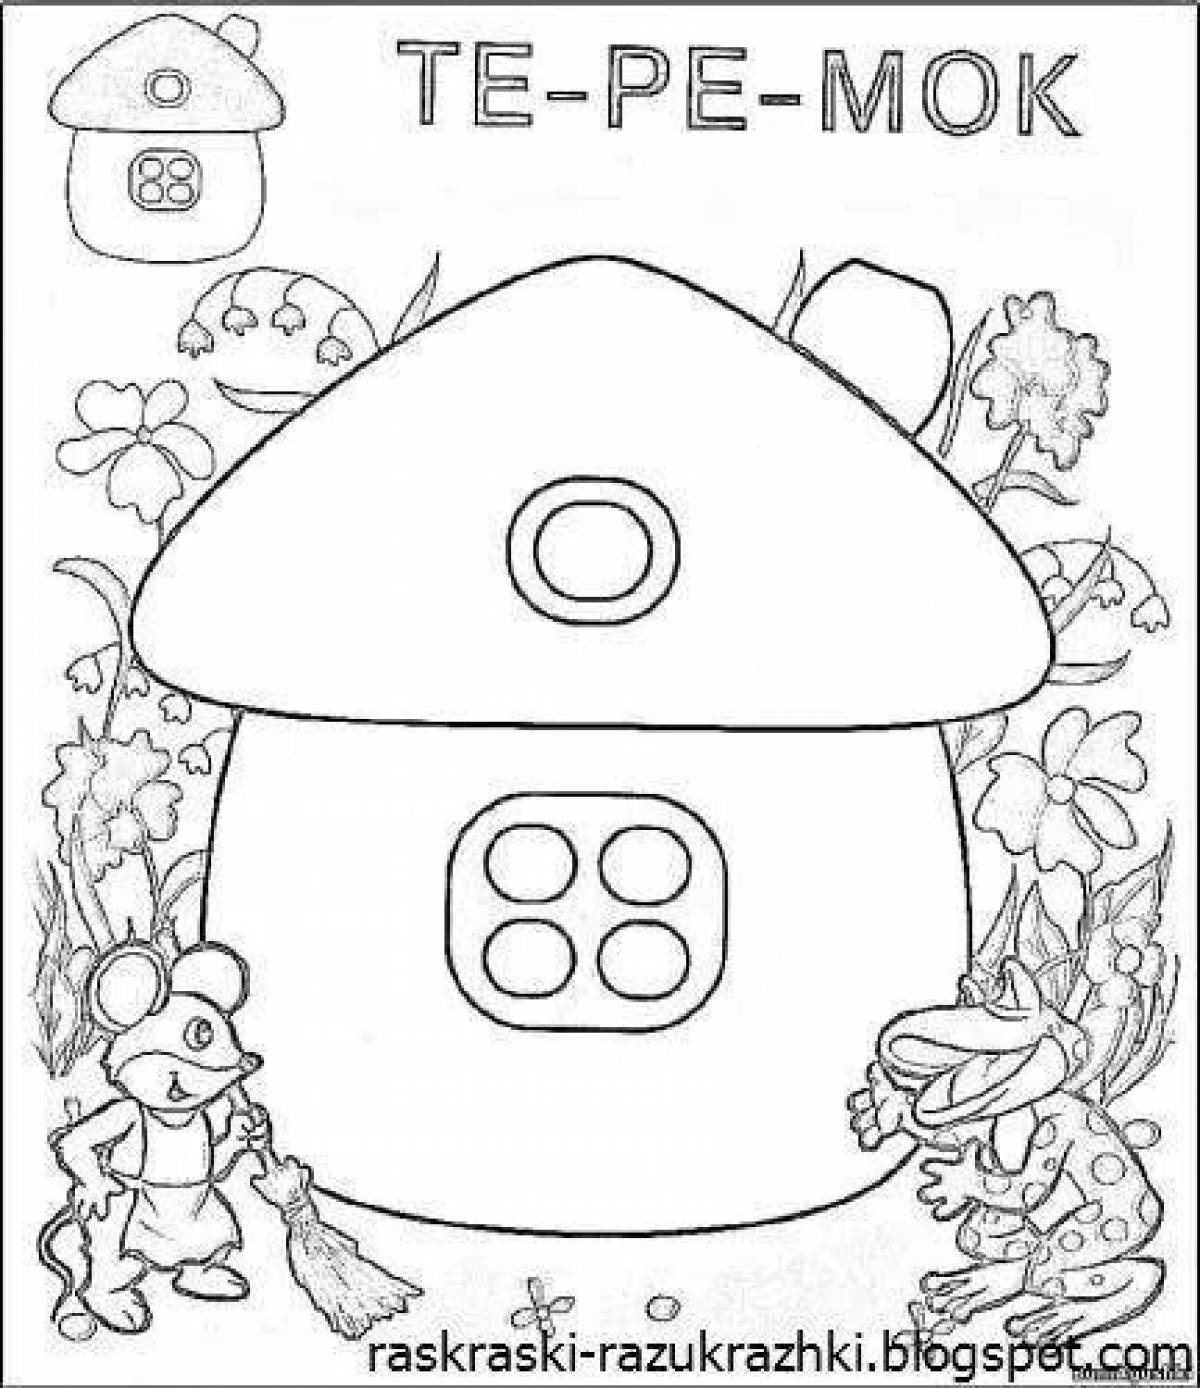 Merry little house coloring for kids